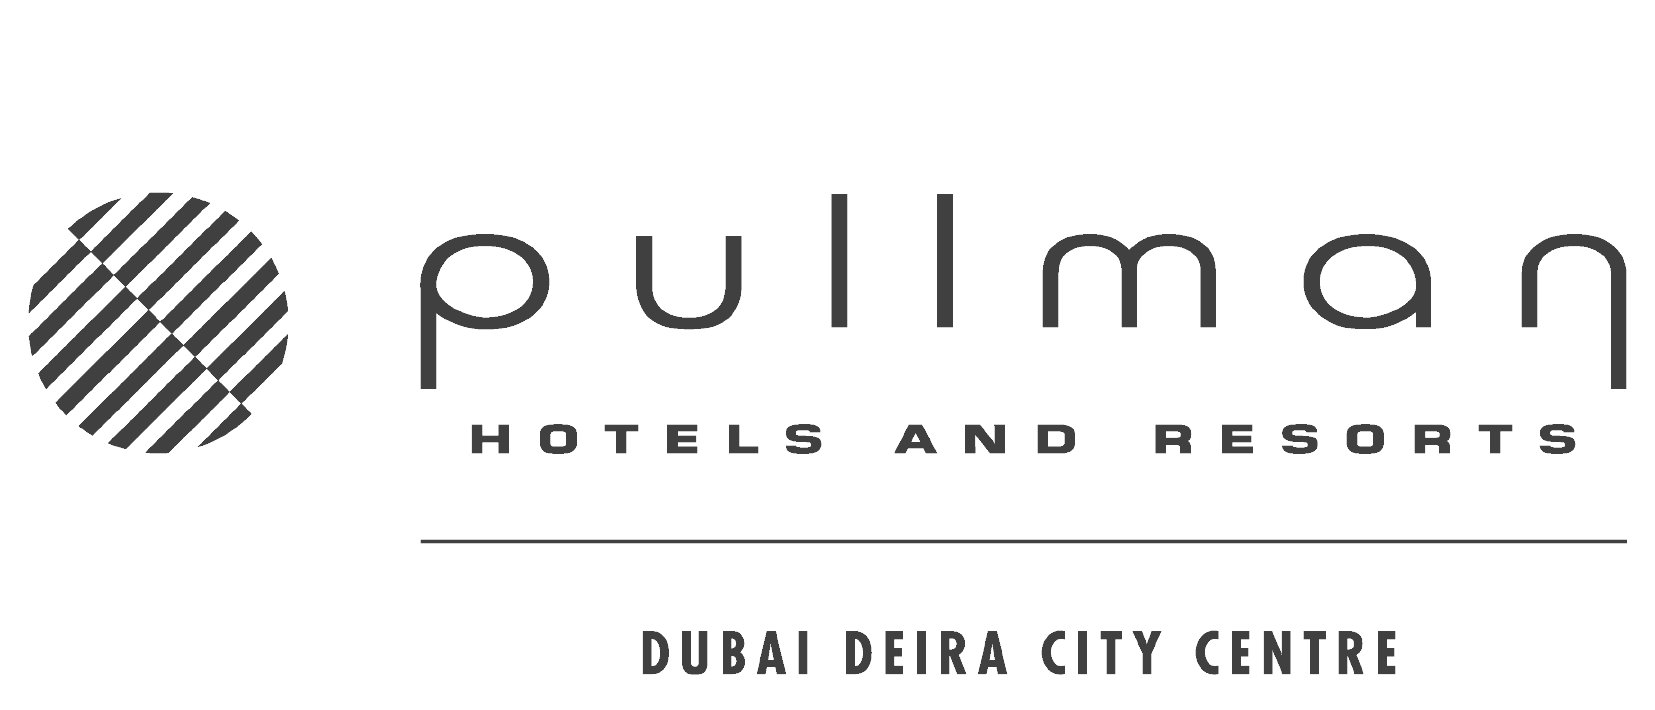 30% OFF Staycation at Pullman